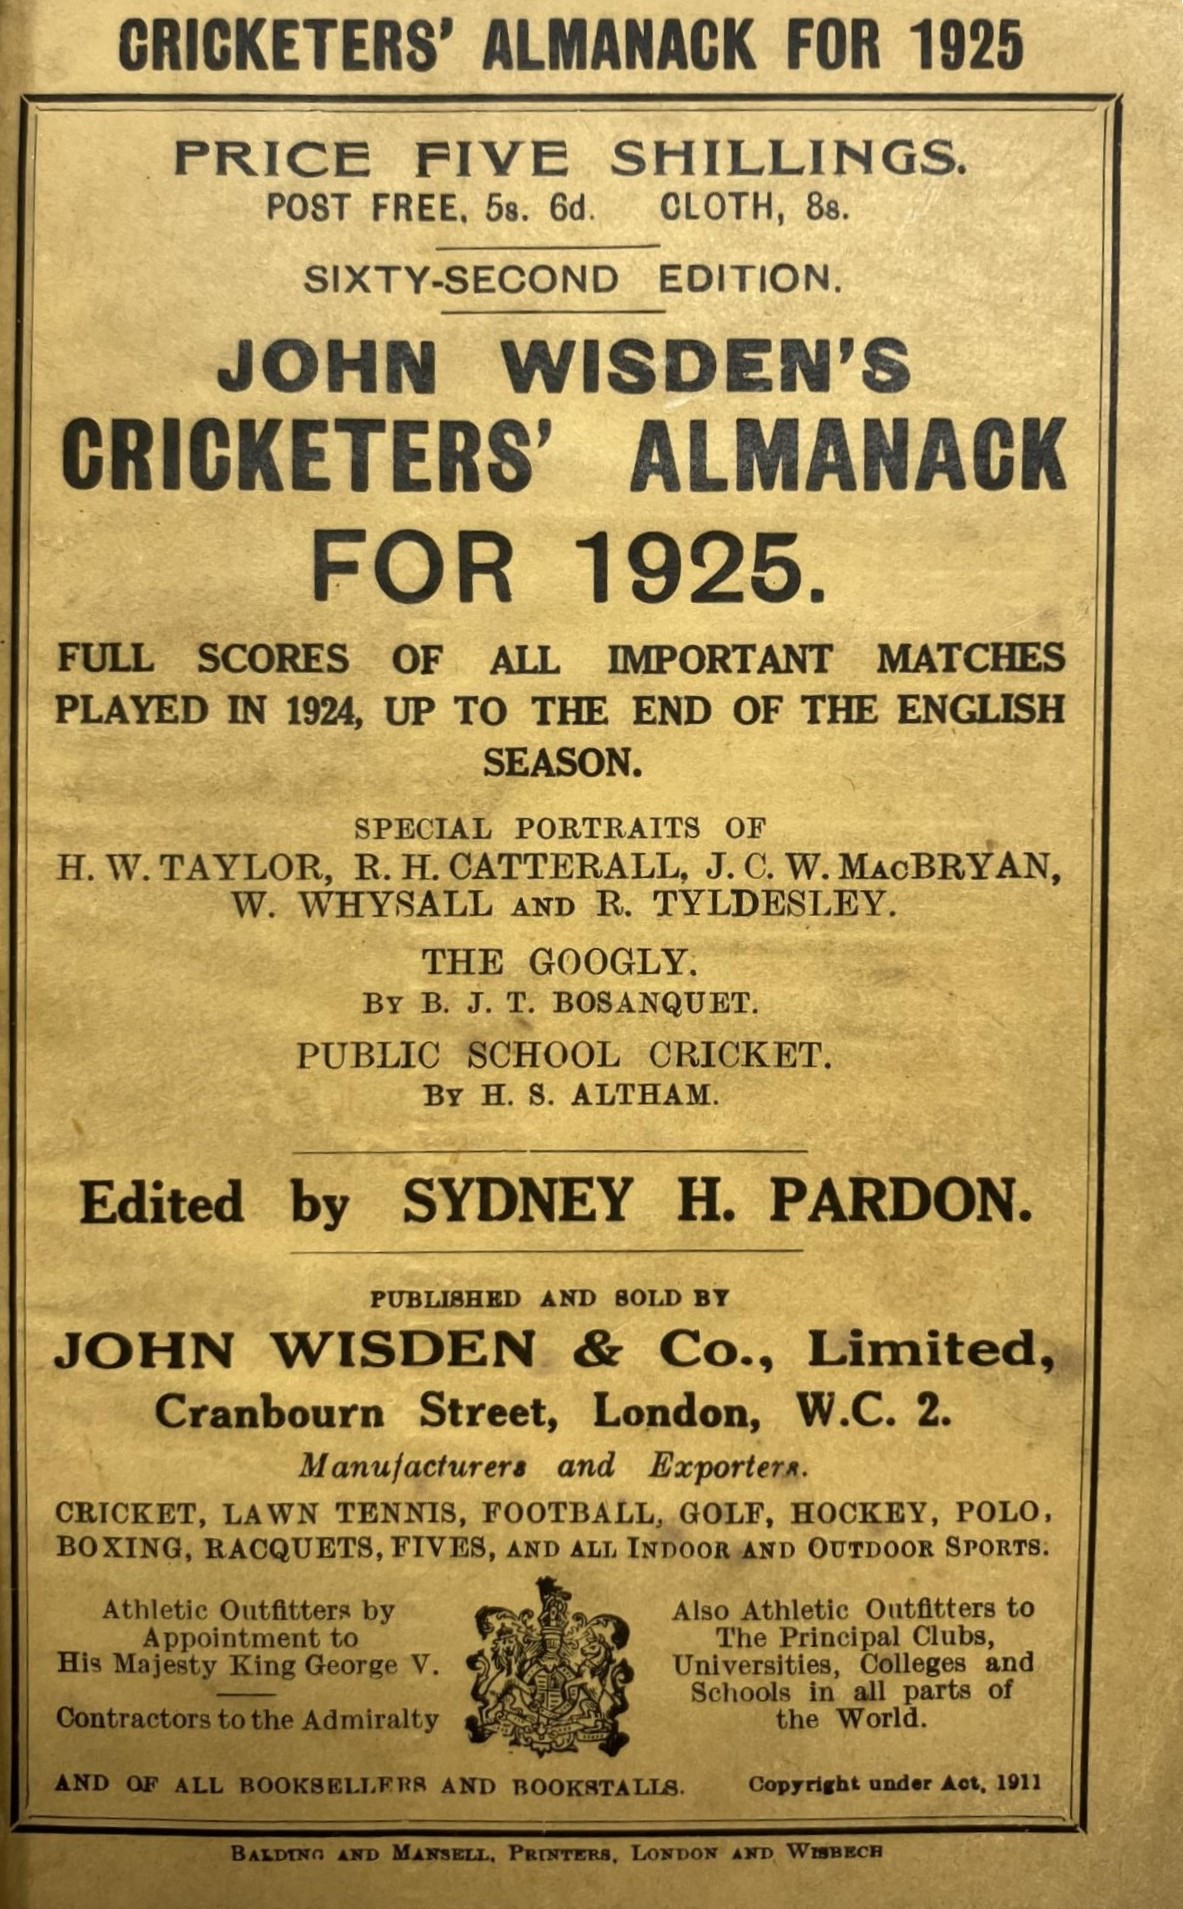 A Wisden Cricketers' Almanack, 1925 Provenance:  From the Harry Brewer Cricket Memorabilia - Image 3 of 4